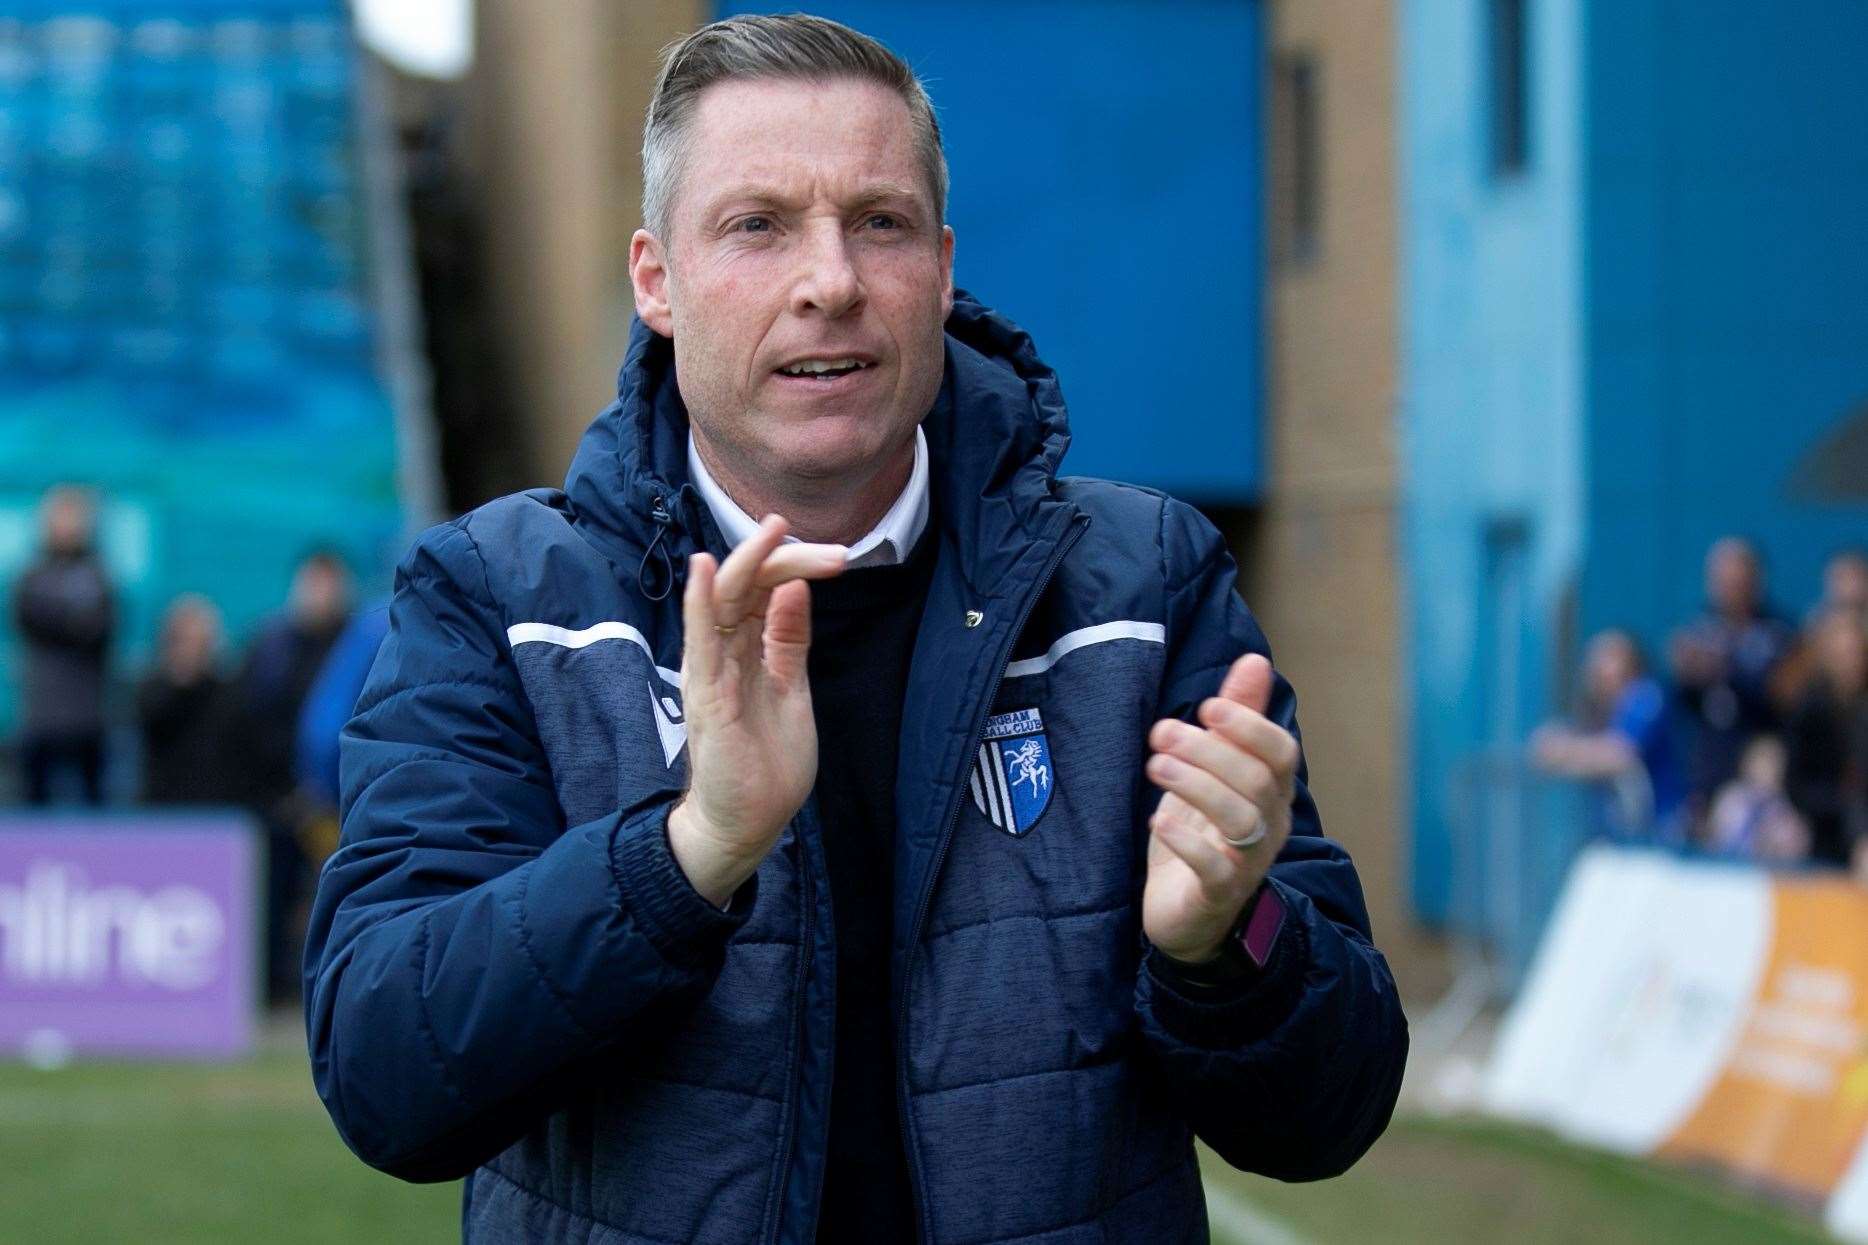 Gillingham manager Neil Harris takes his side to Salford City for their final League 2 match this season